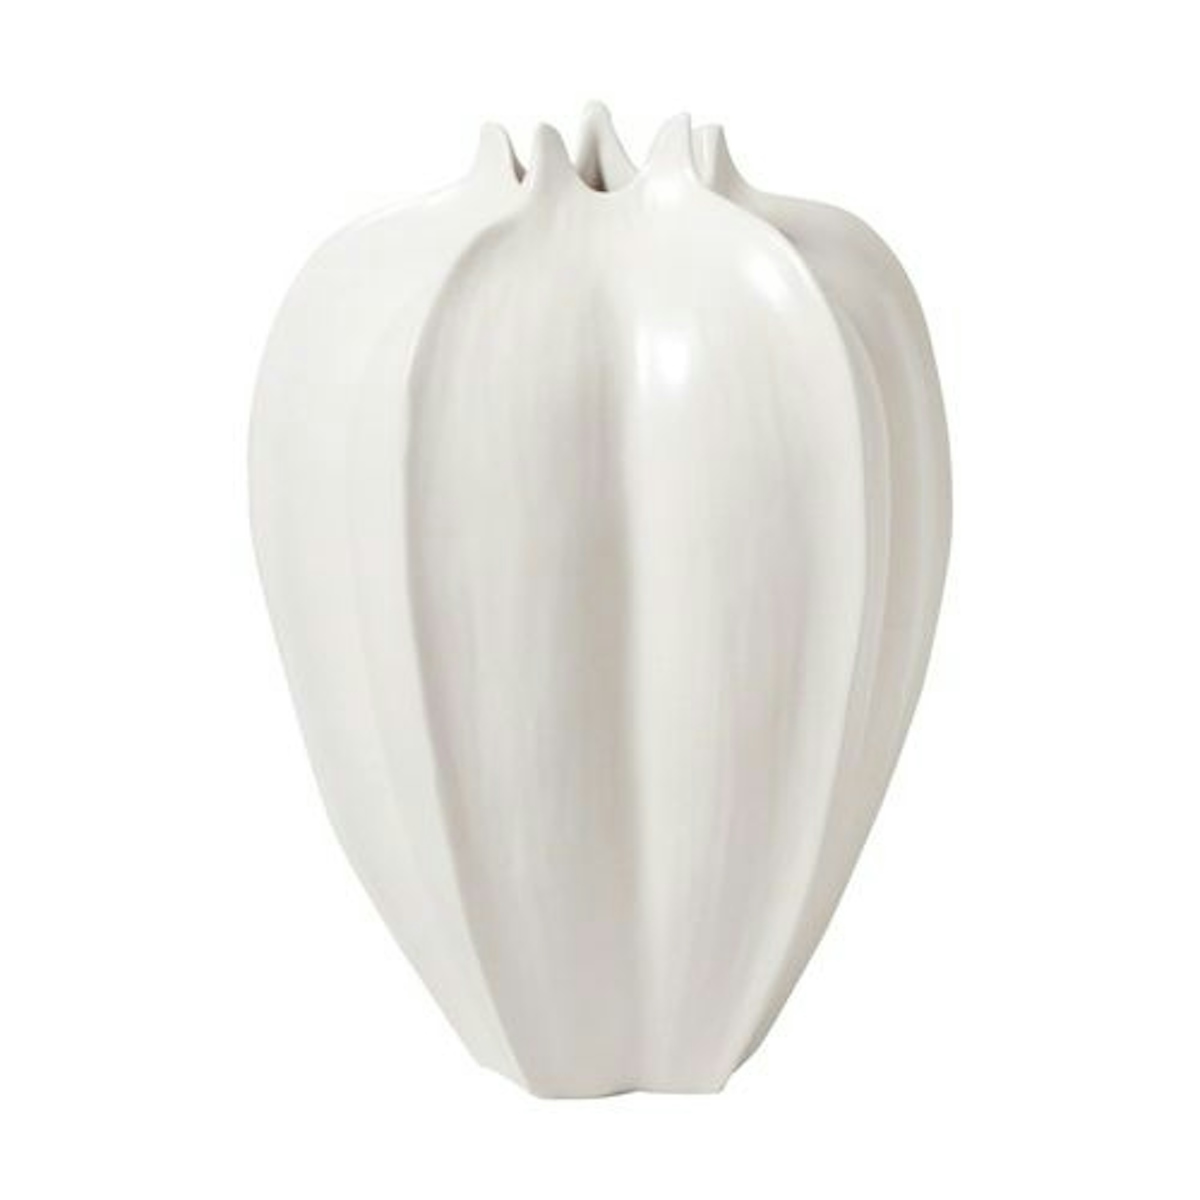 Star Fruit Vase - 9 Best Decorative Vases To Buy For Your Home - LuxDeco.com